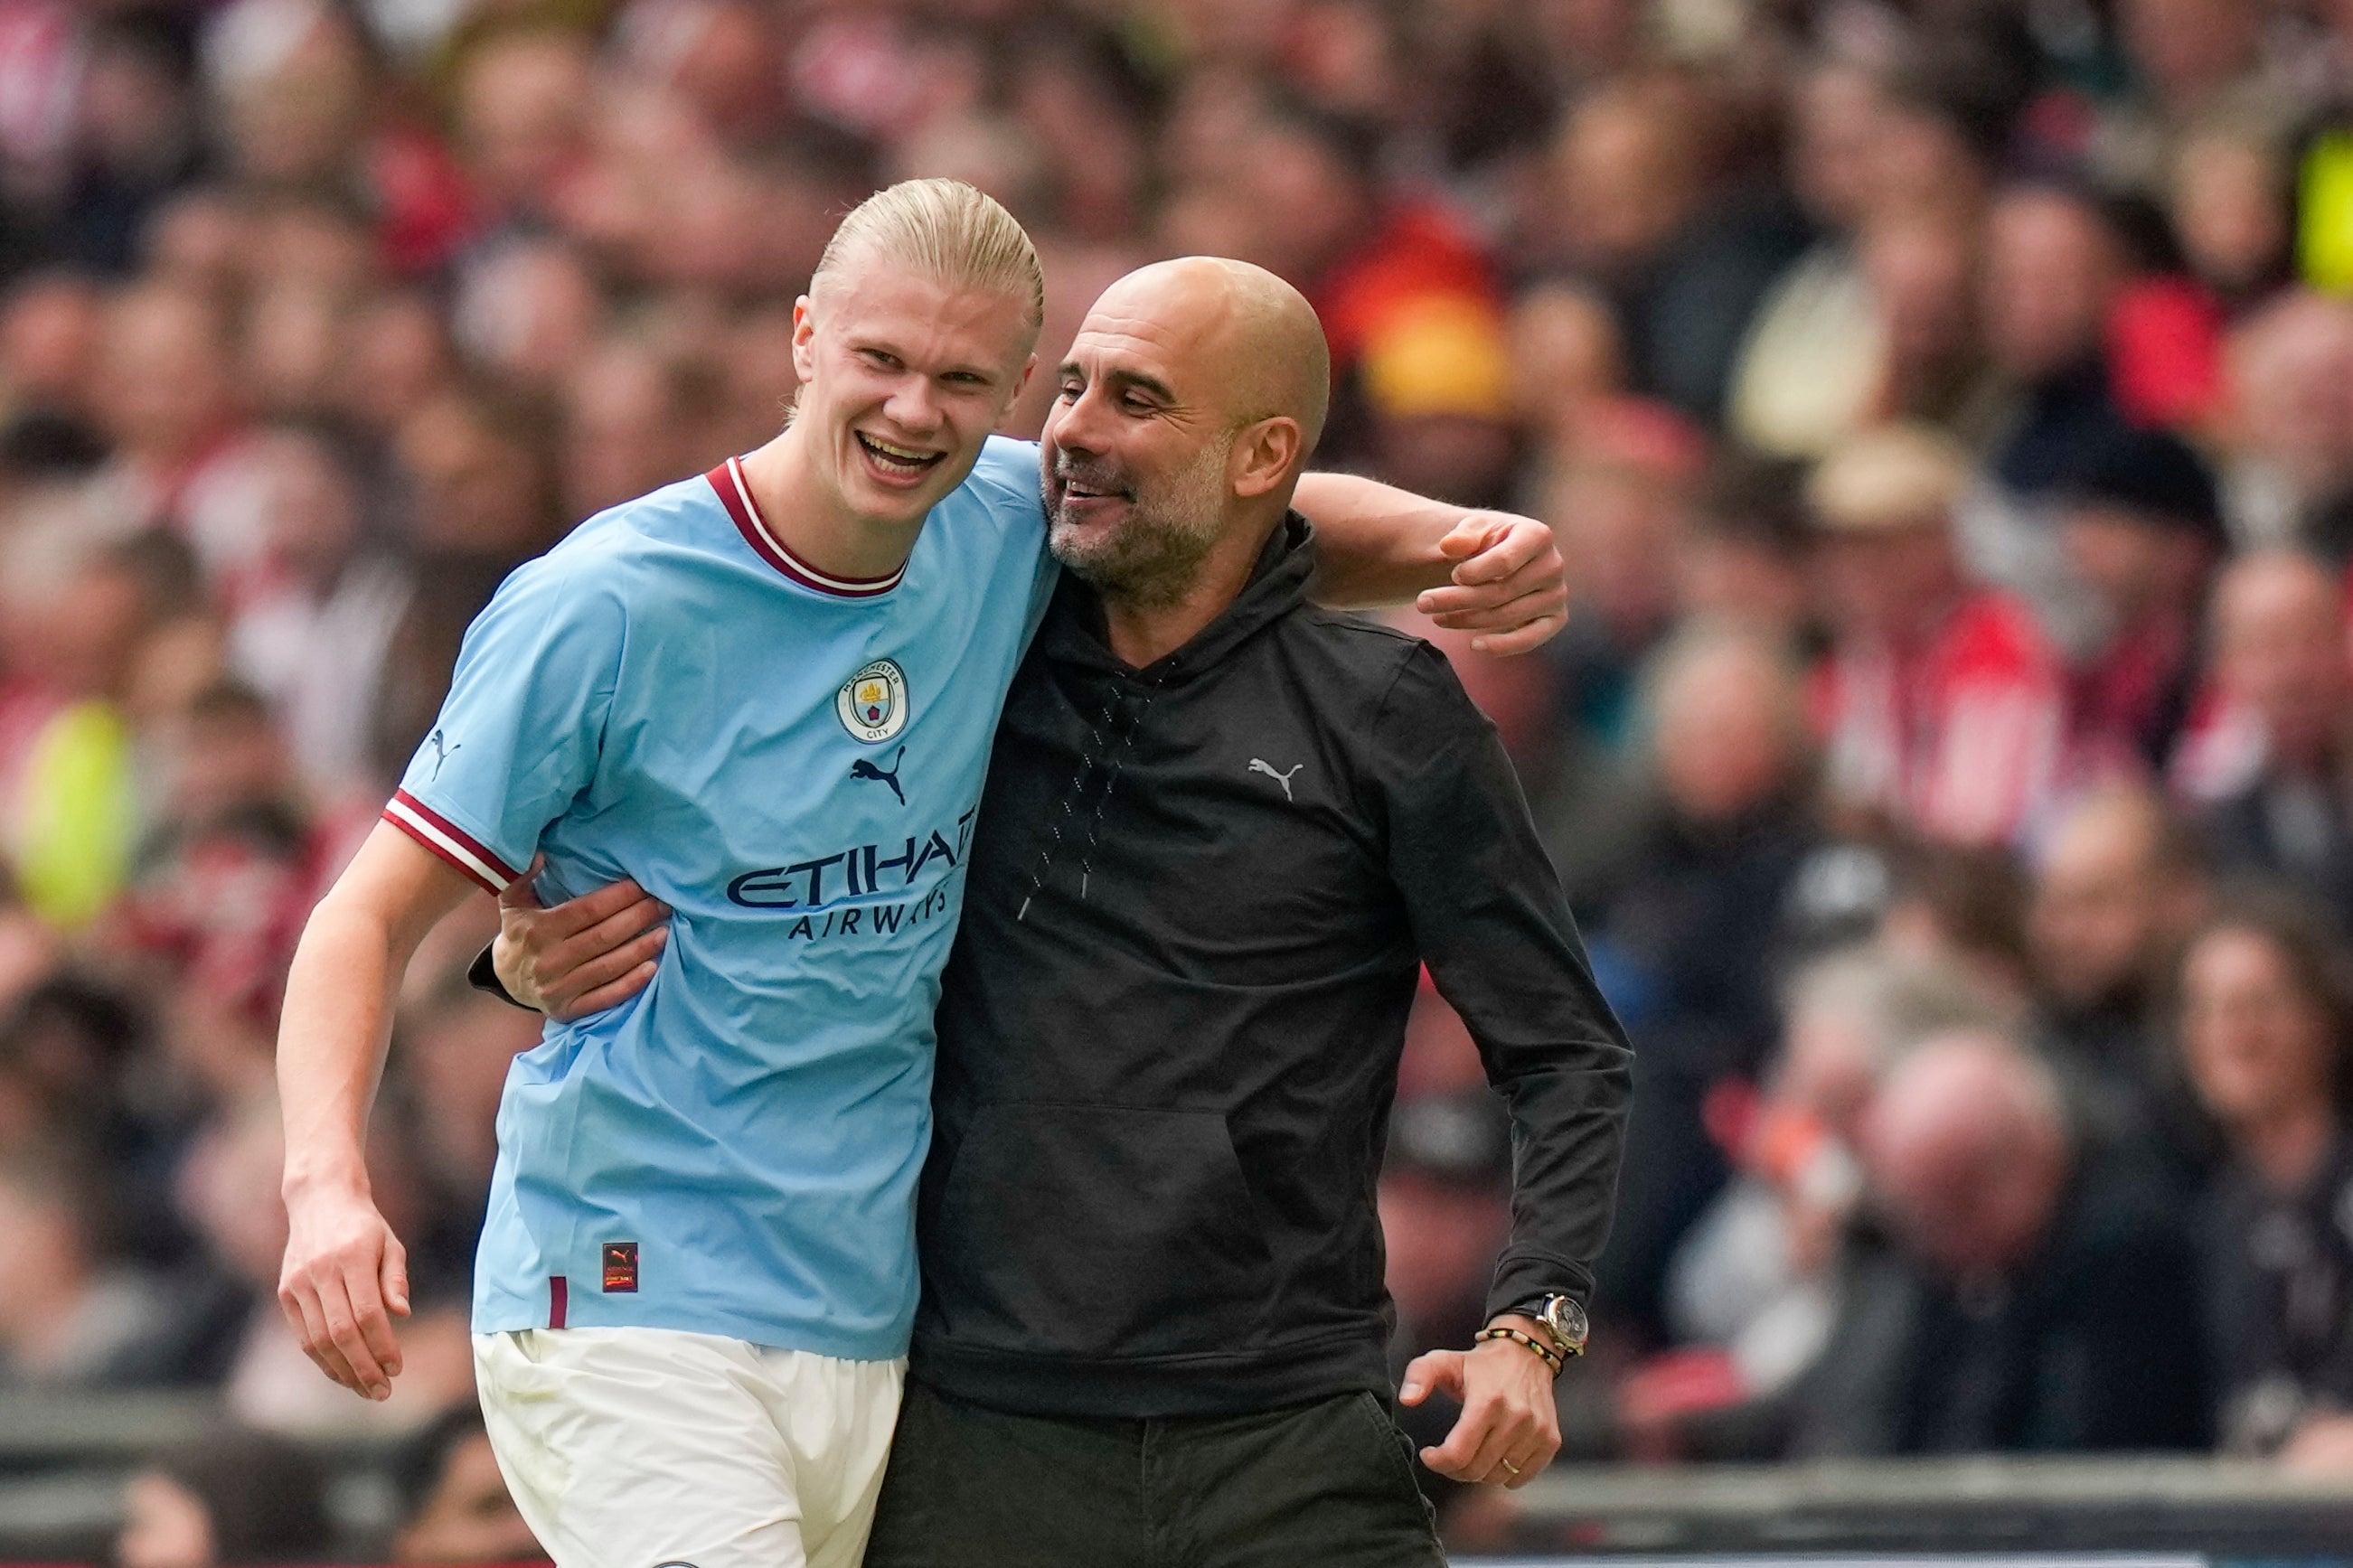 Erling Haaland could hold the key to satisfying Pep Guardiola’s Champions League “obsession”